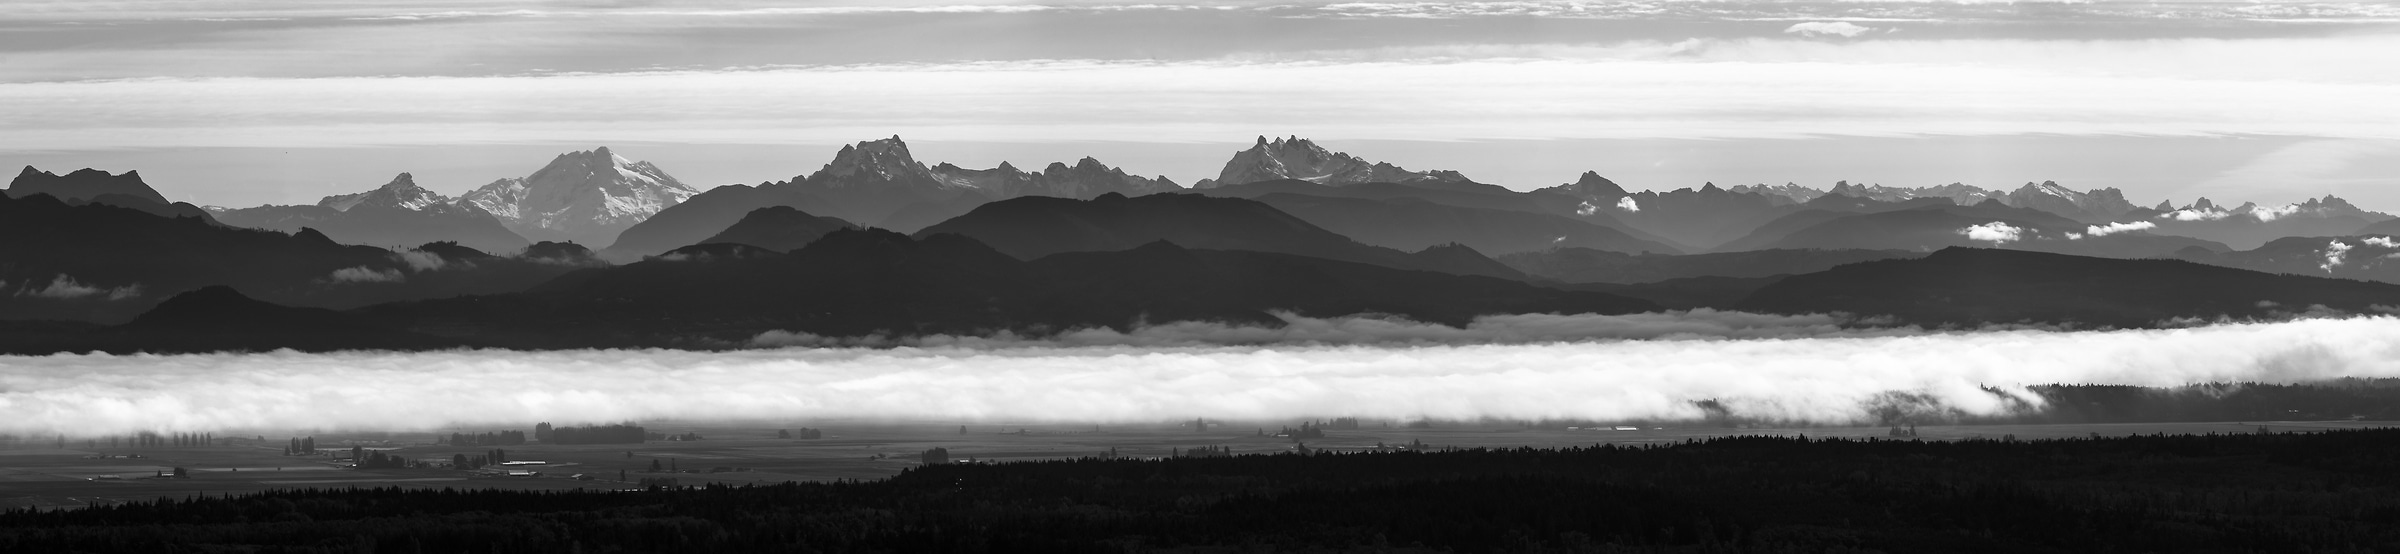 132 megapixels! A very high resolution, large-format VAST photo print of the North Cascade Mountains and Skagit Valley; fine art landscape photo created by Scott Rinckenberger in Washington.